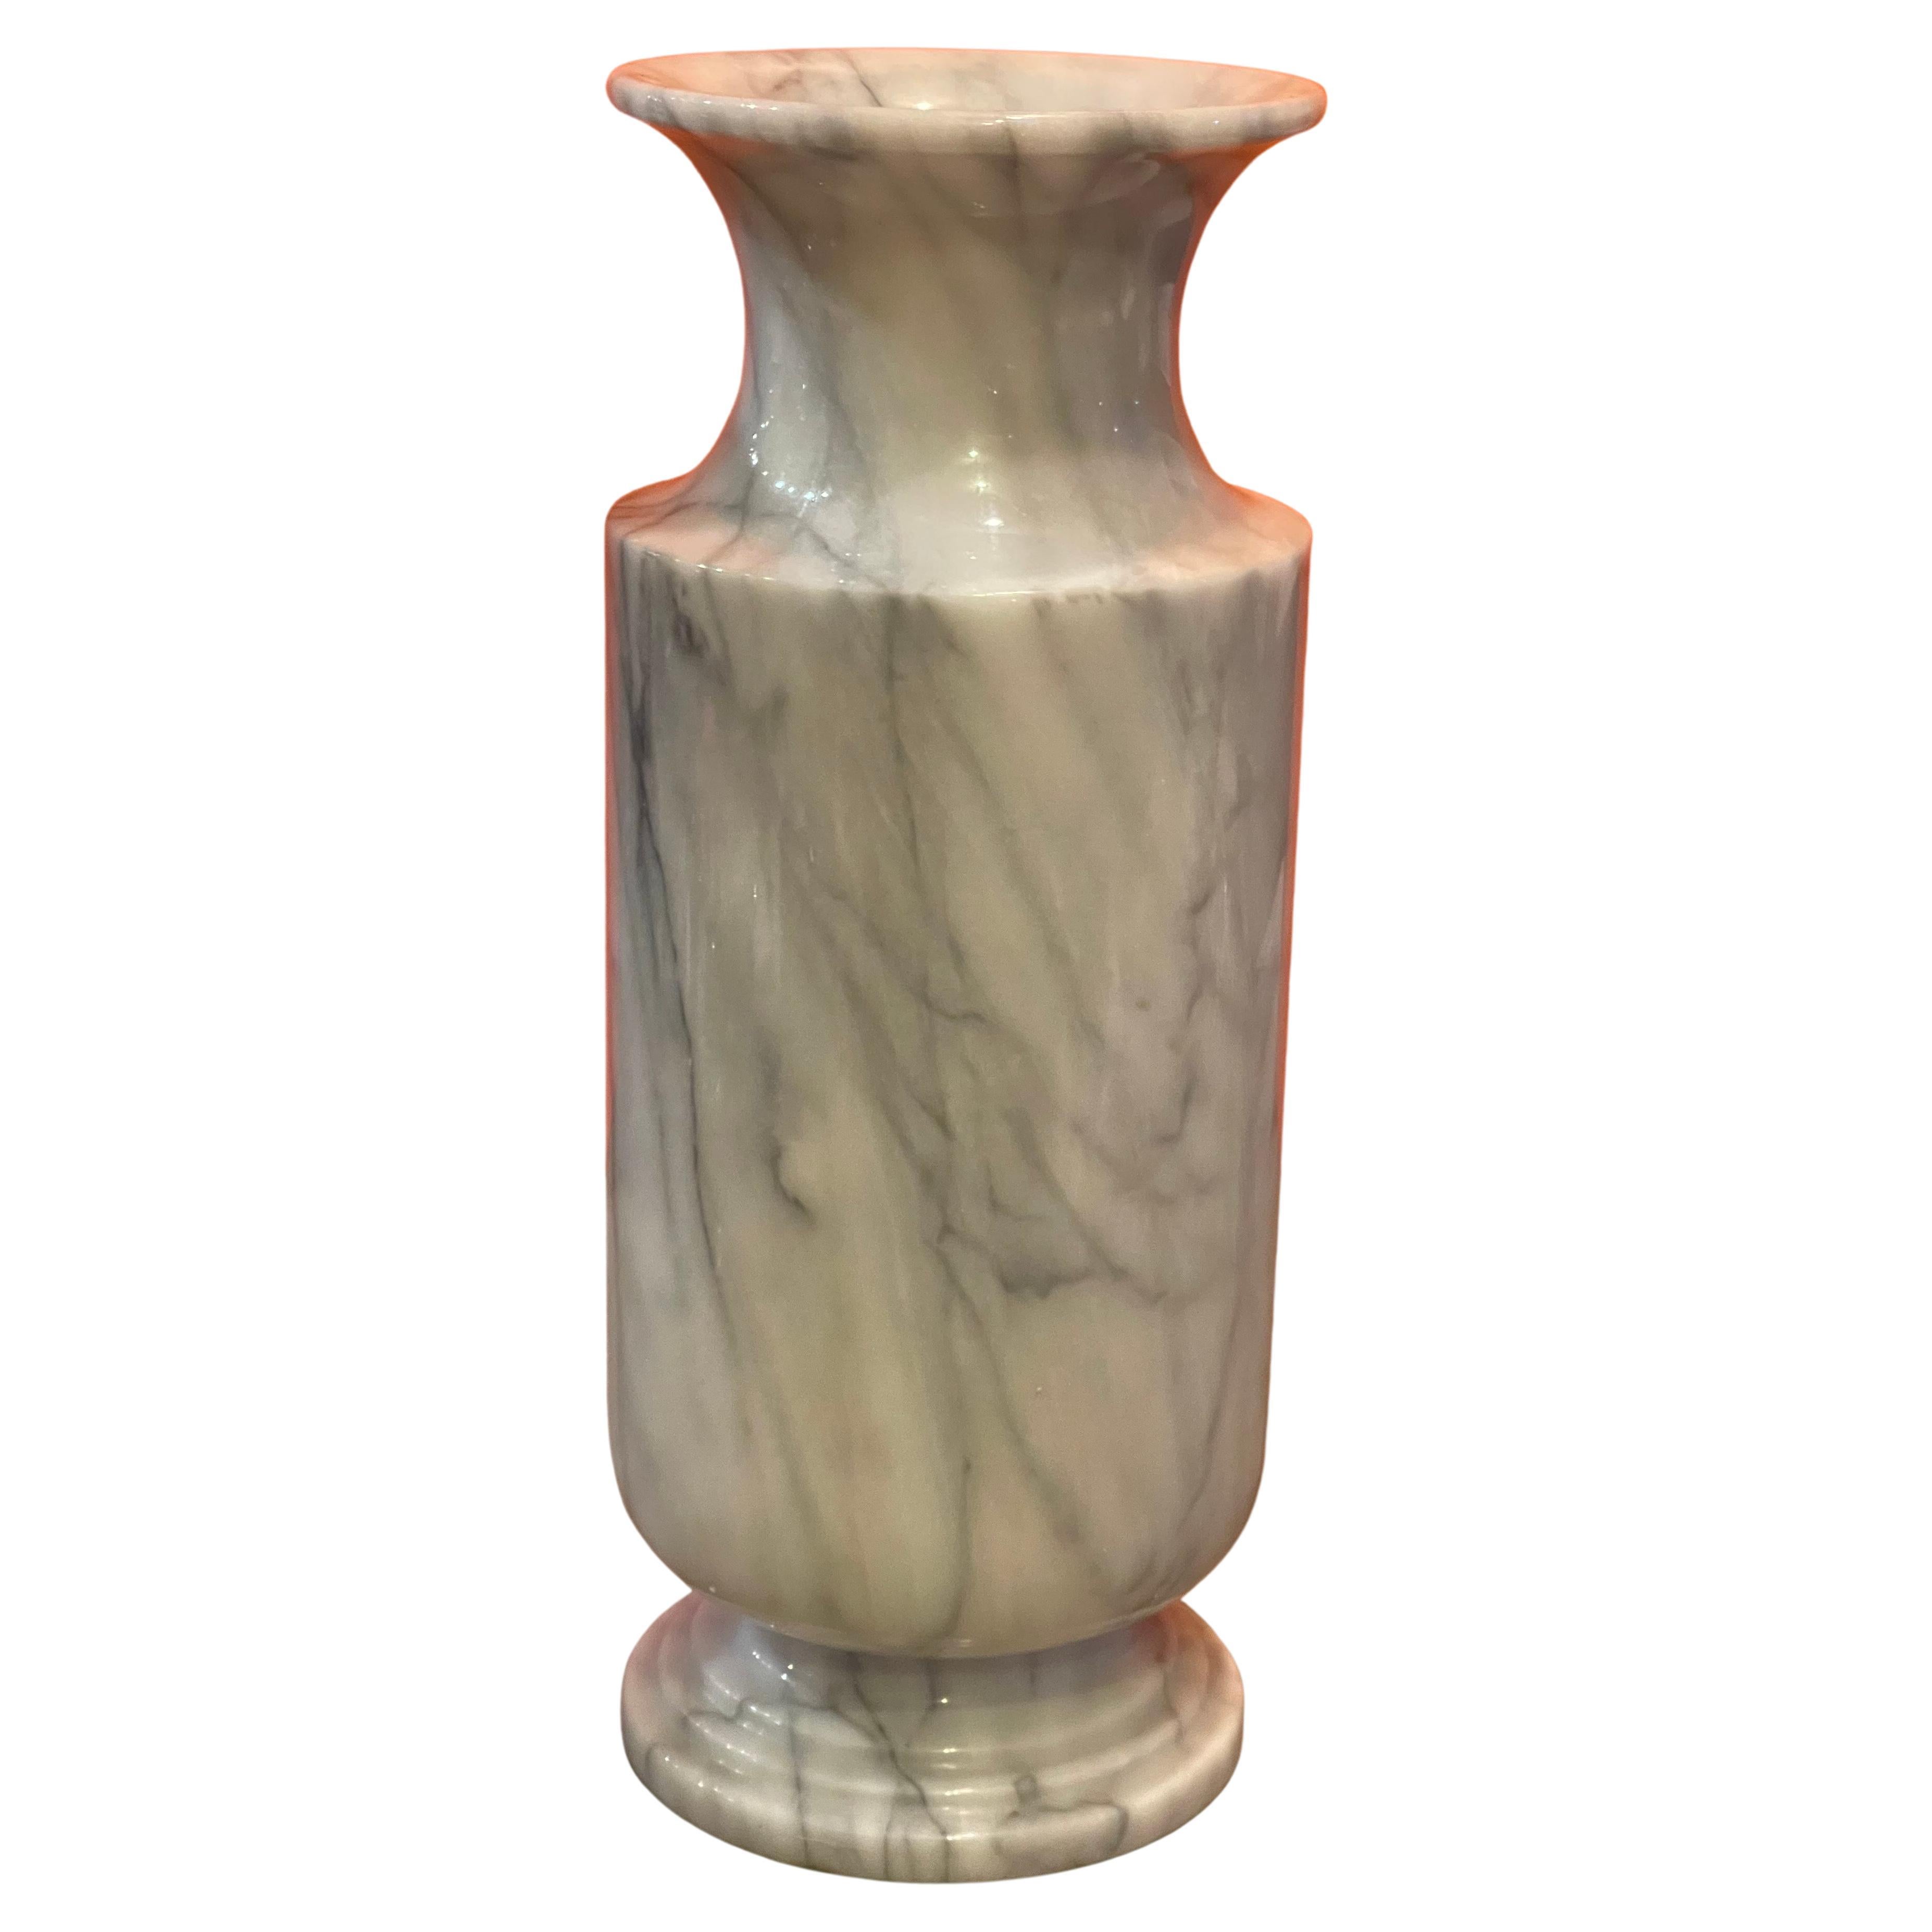 Large post-modern Italian Carrara marble vase, circa 1970s. The vase is primarily white in color with grey and black veining throughout. The vase is in very good vintage condition with no chips or cracks and measures 7.5